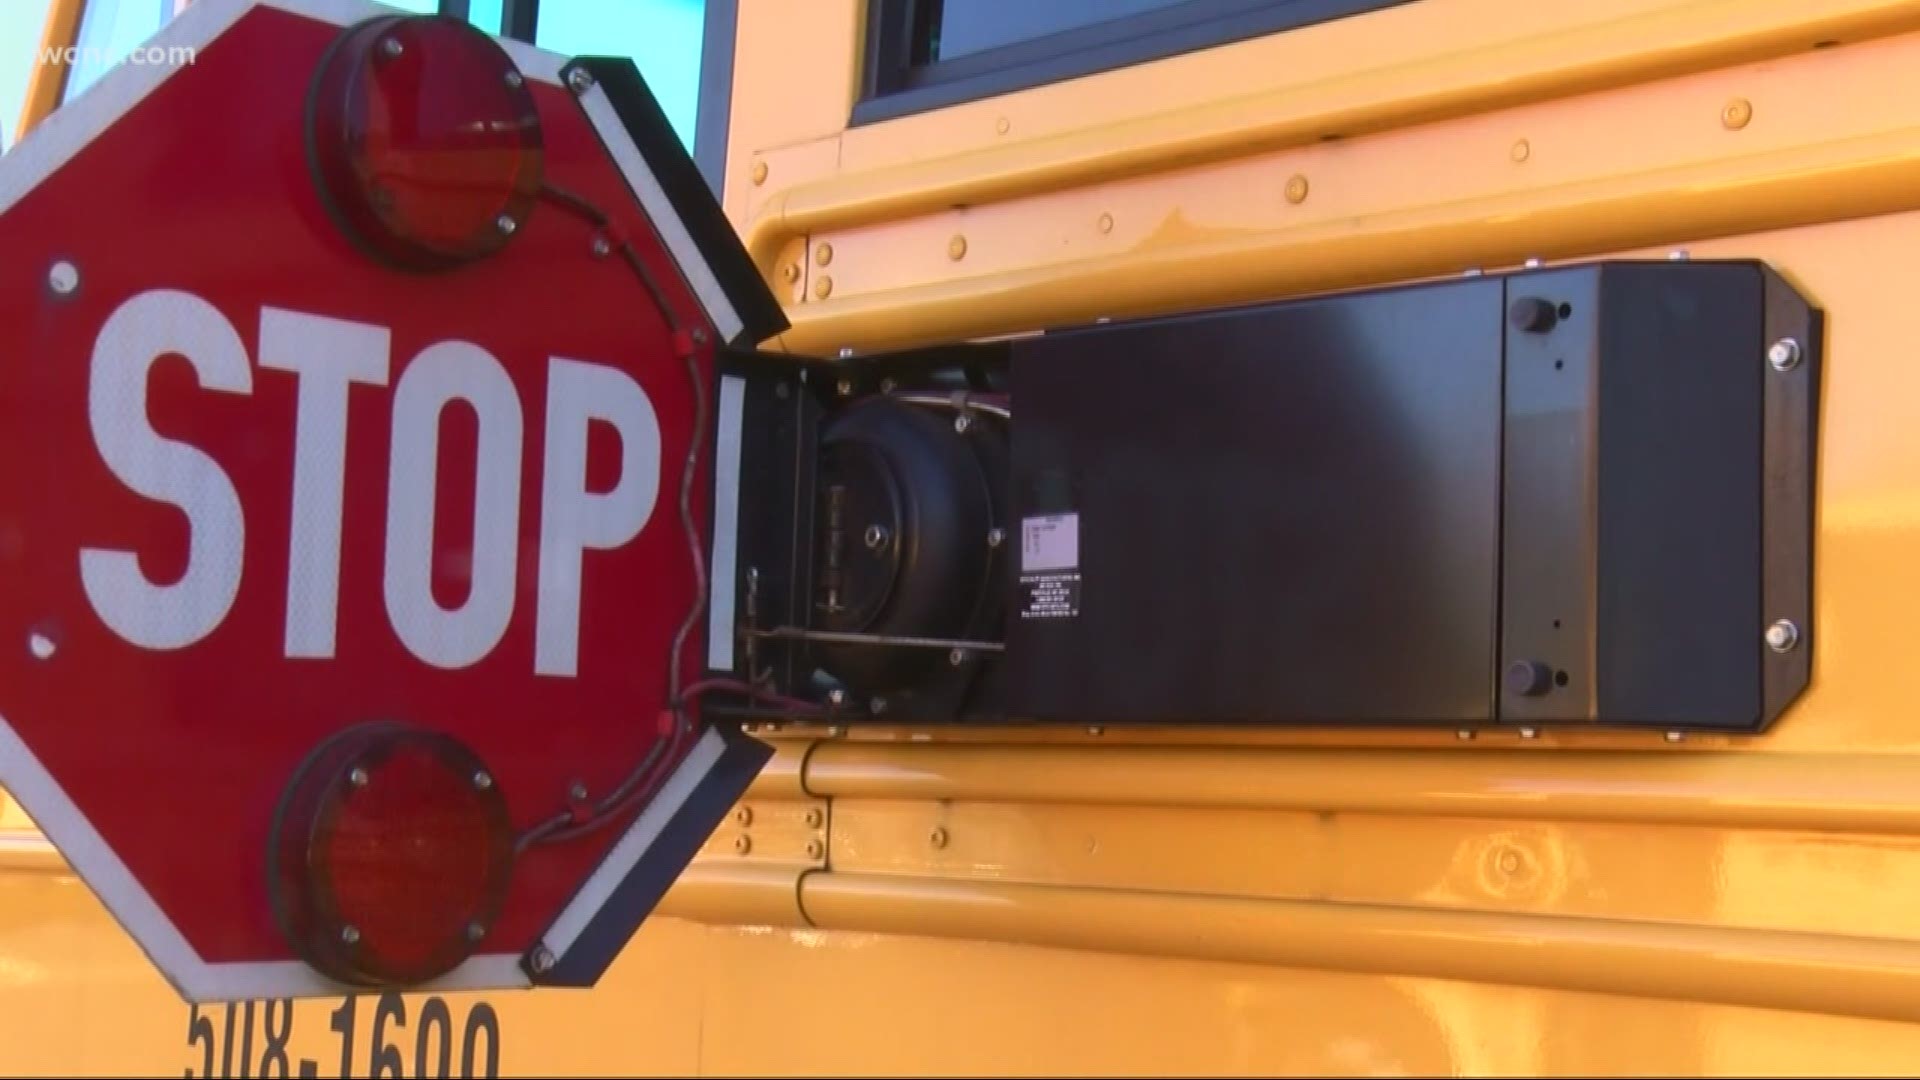 Some South Carolina lawmakers say it's time for school buses to have seat belts after five students were injured in a crash this week. They believe if the kids were buckled up, they wouldn't have been hurt.